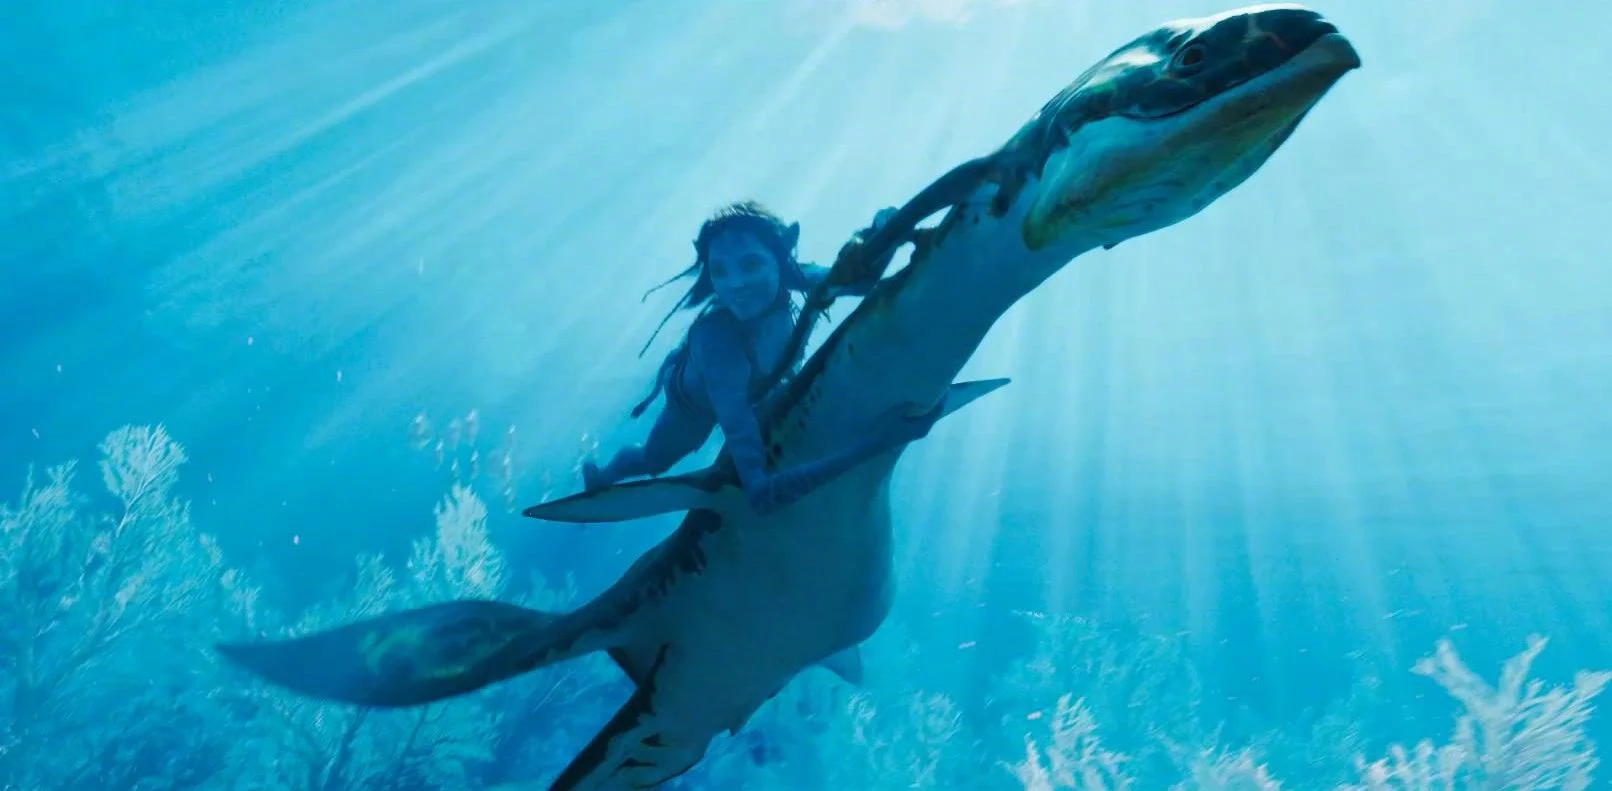 avatar-the-way-of-water-reveals-new-stills-released-at-the-end-of-the-year-3